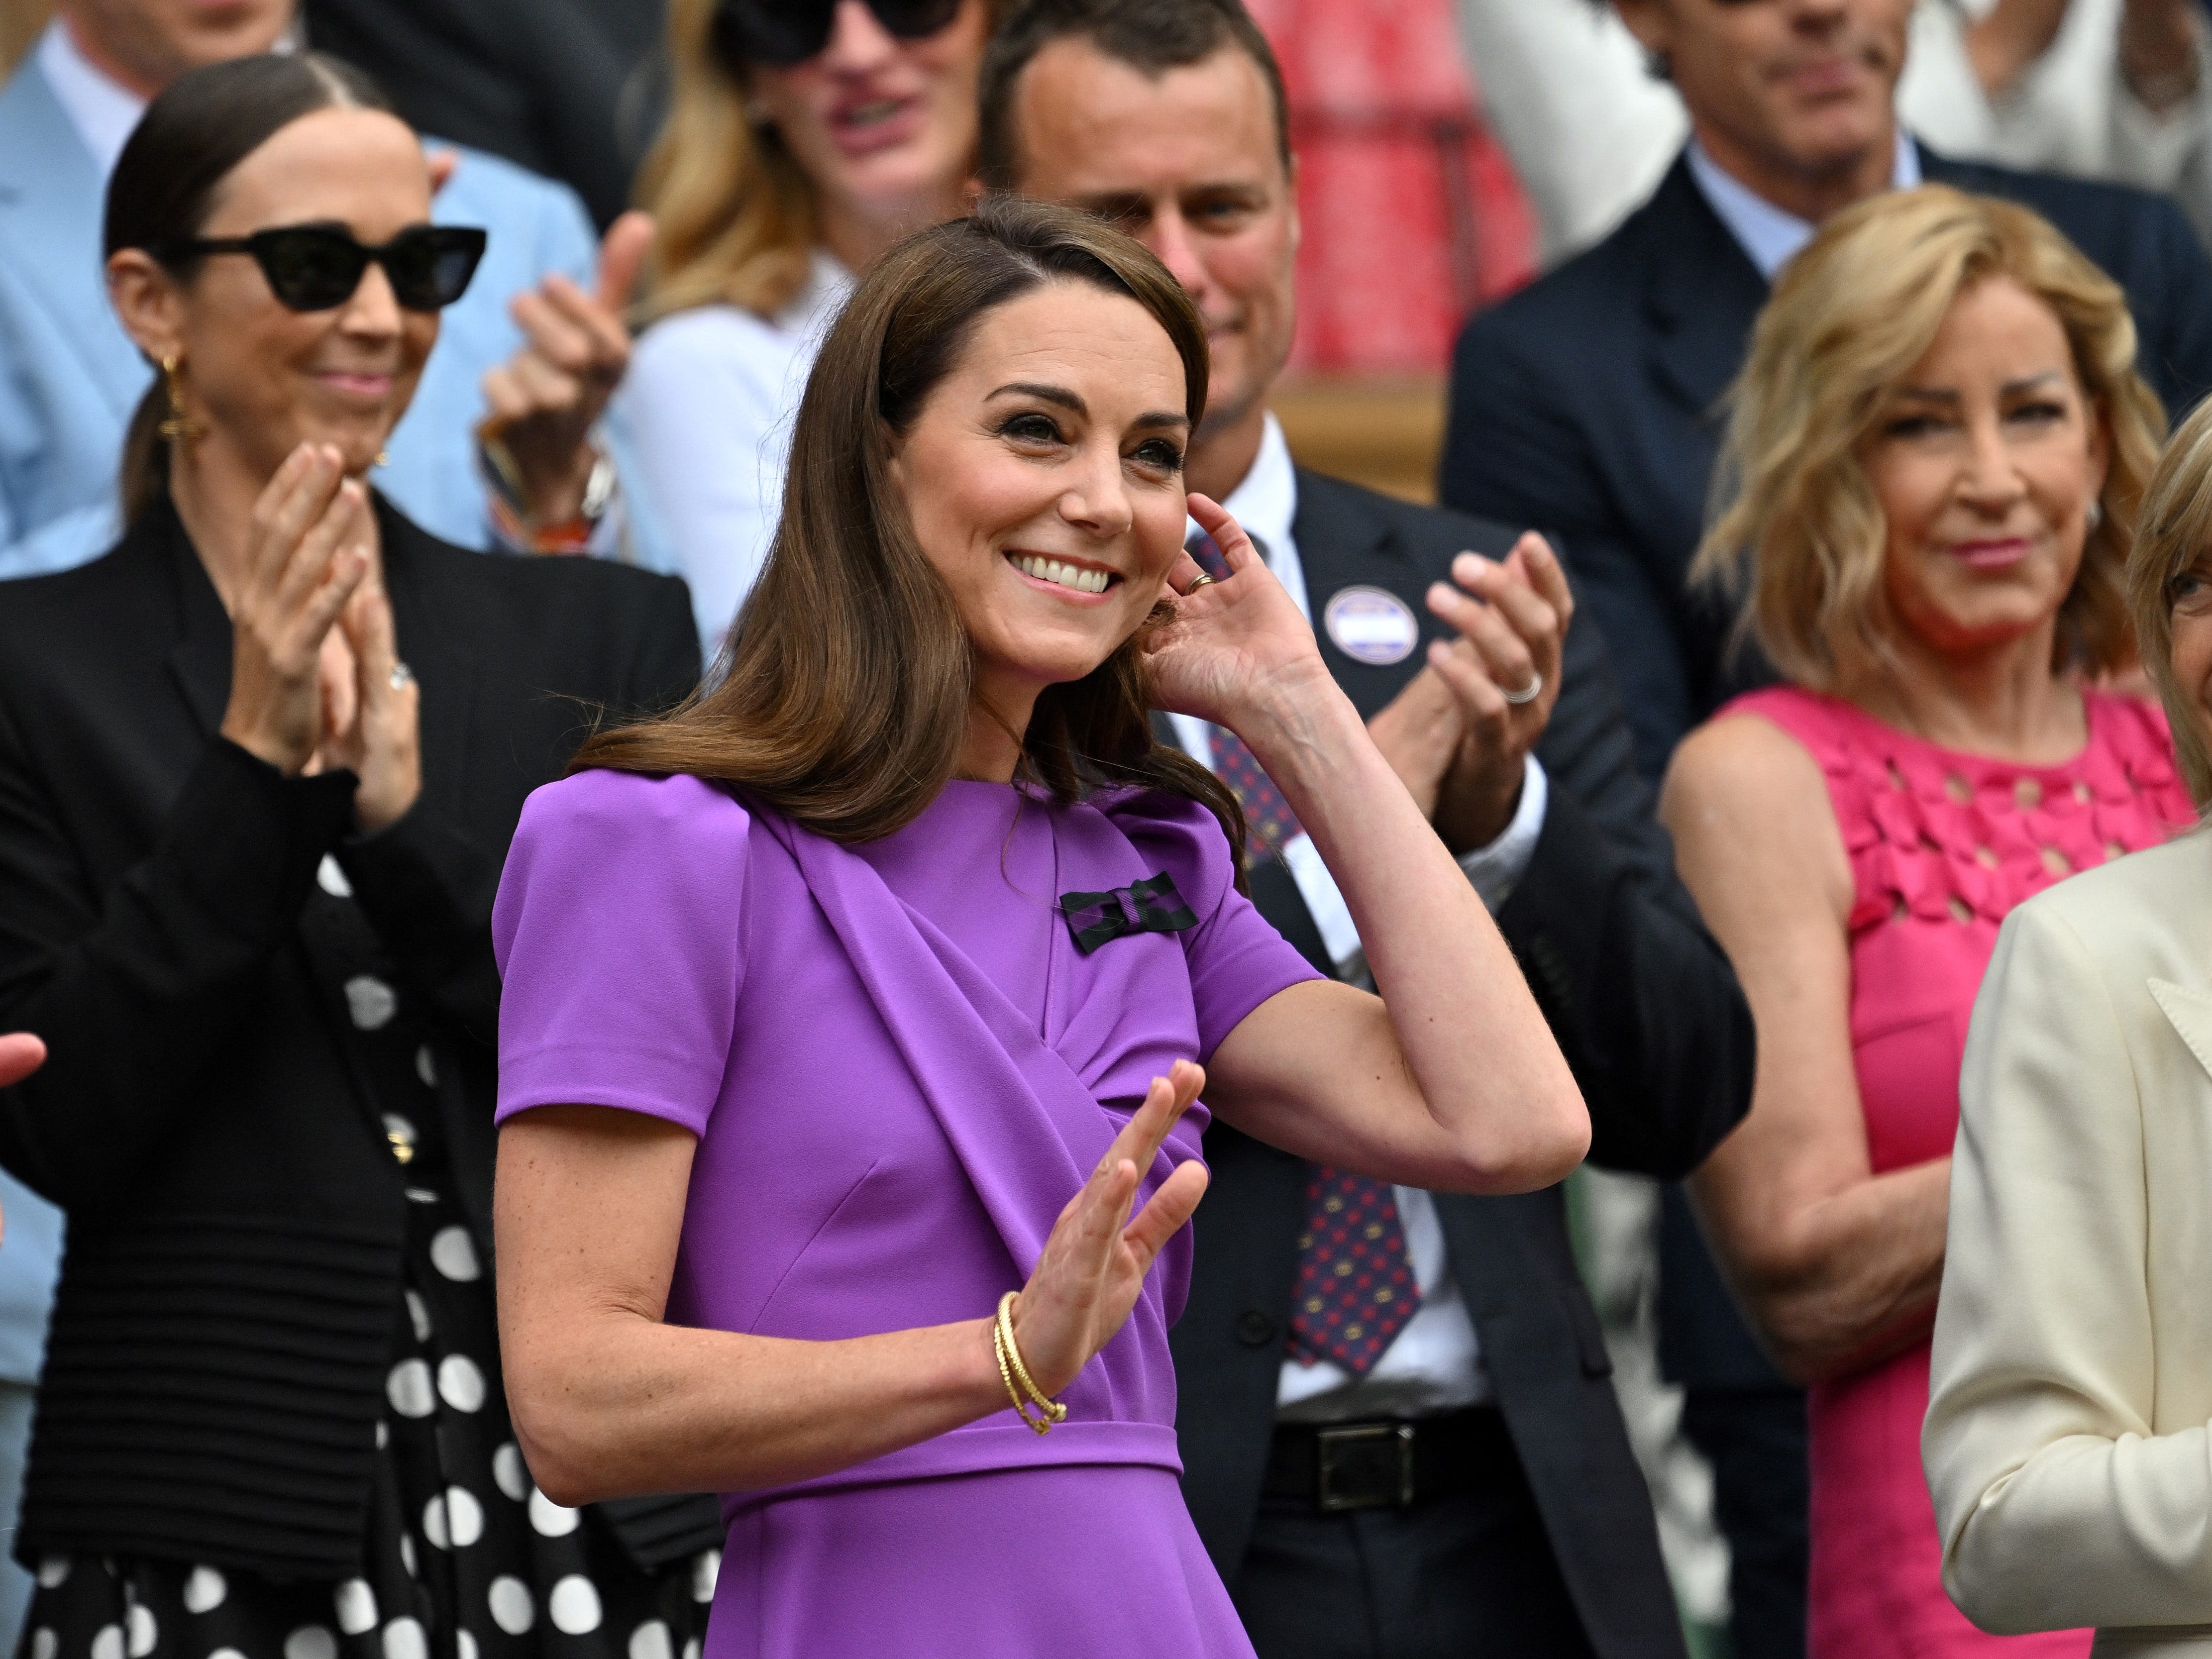 PHOTOS: Kate Middleton attends Wimbledon final — her 2nd public appearance since her cancer diagnosis